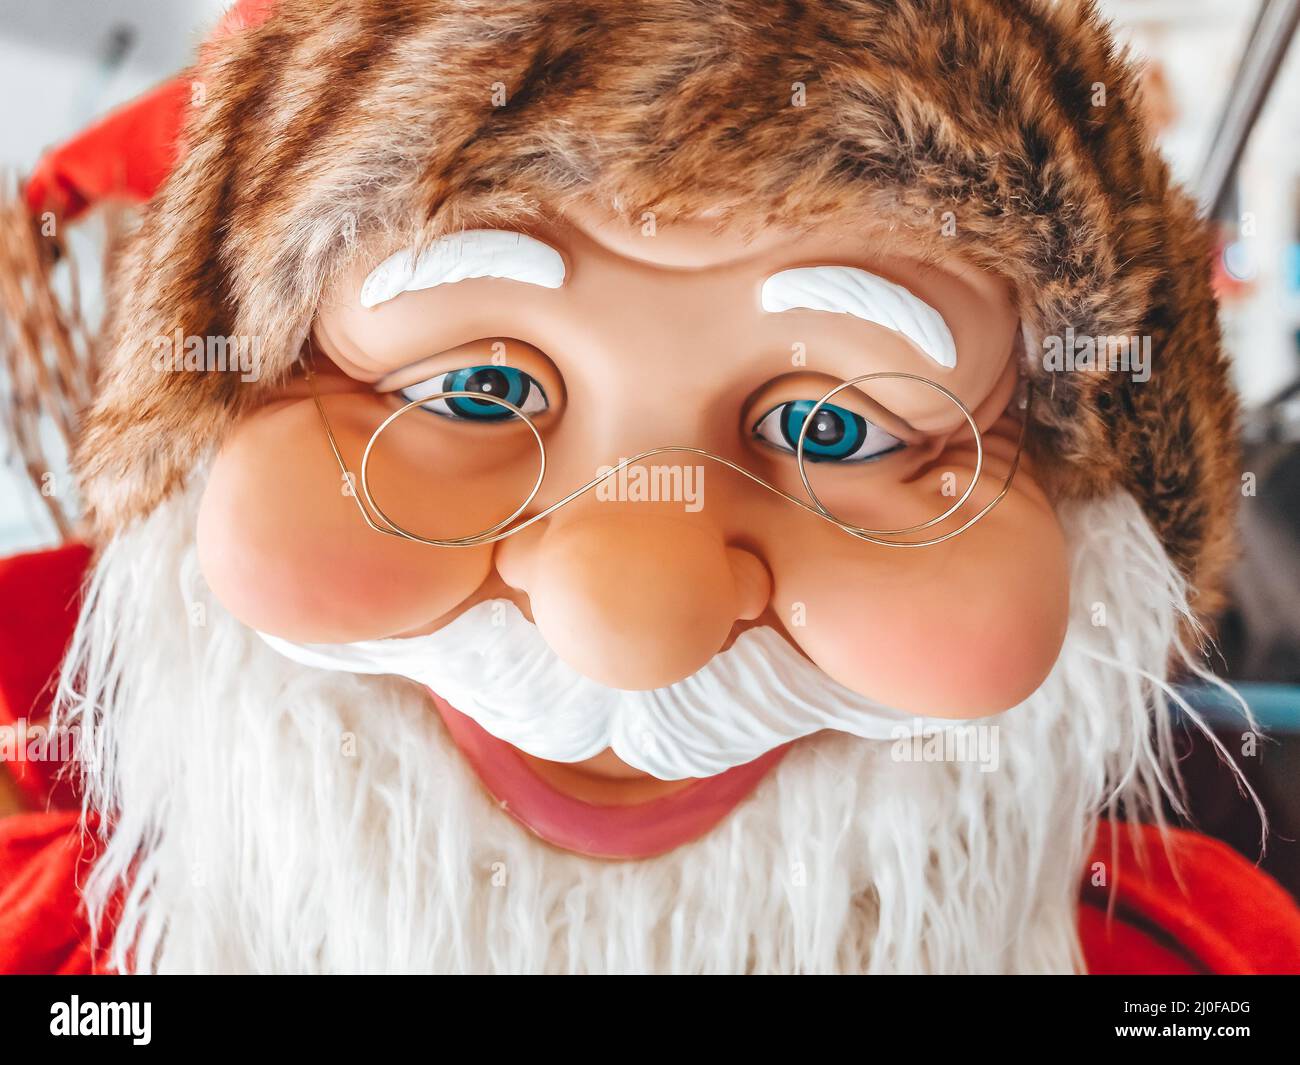 Toy smiling face of rubber santa claus with blue eyes and wire glasses. Stock Photo